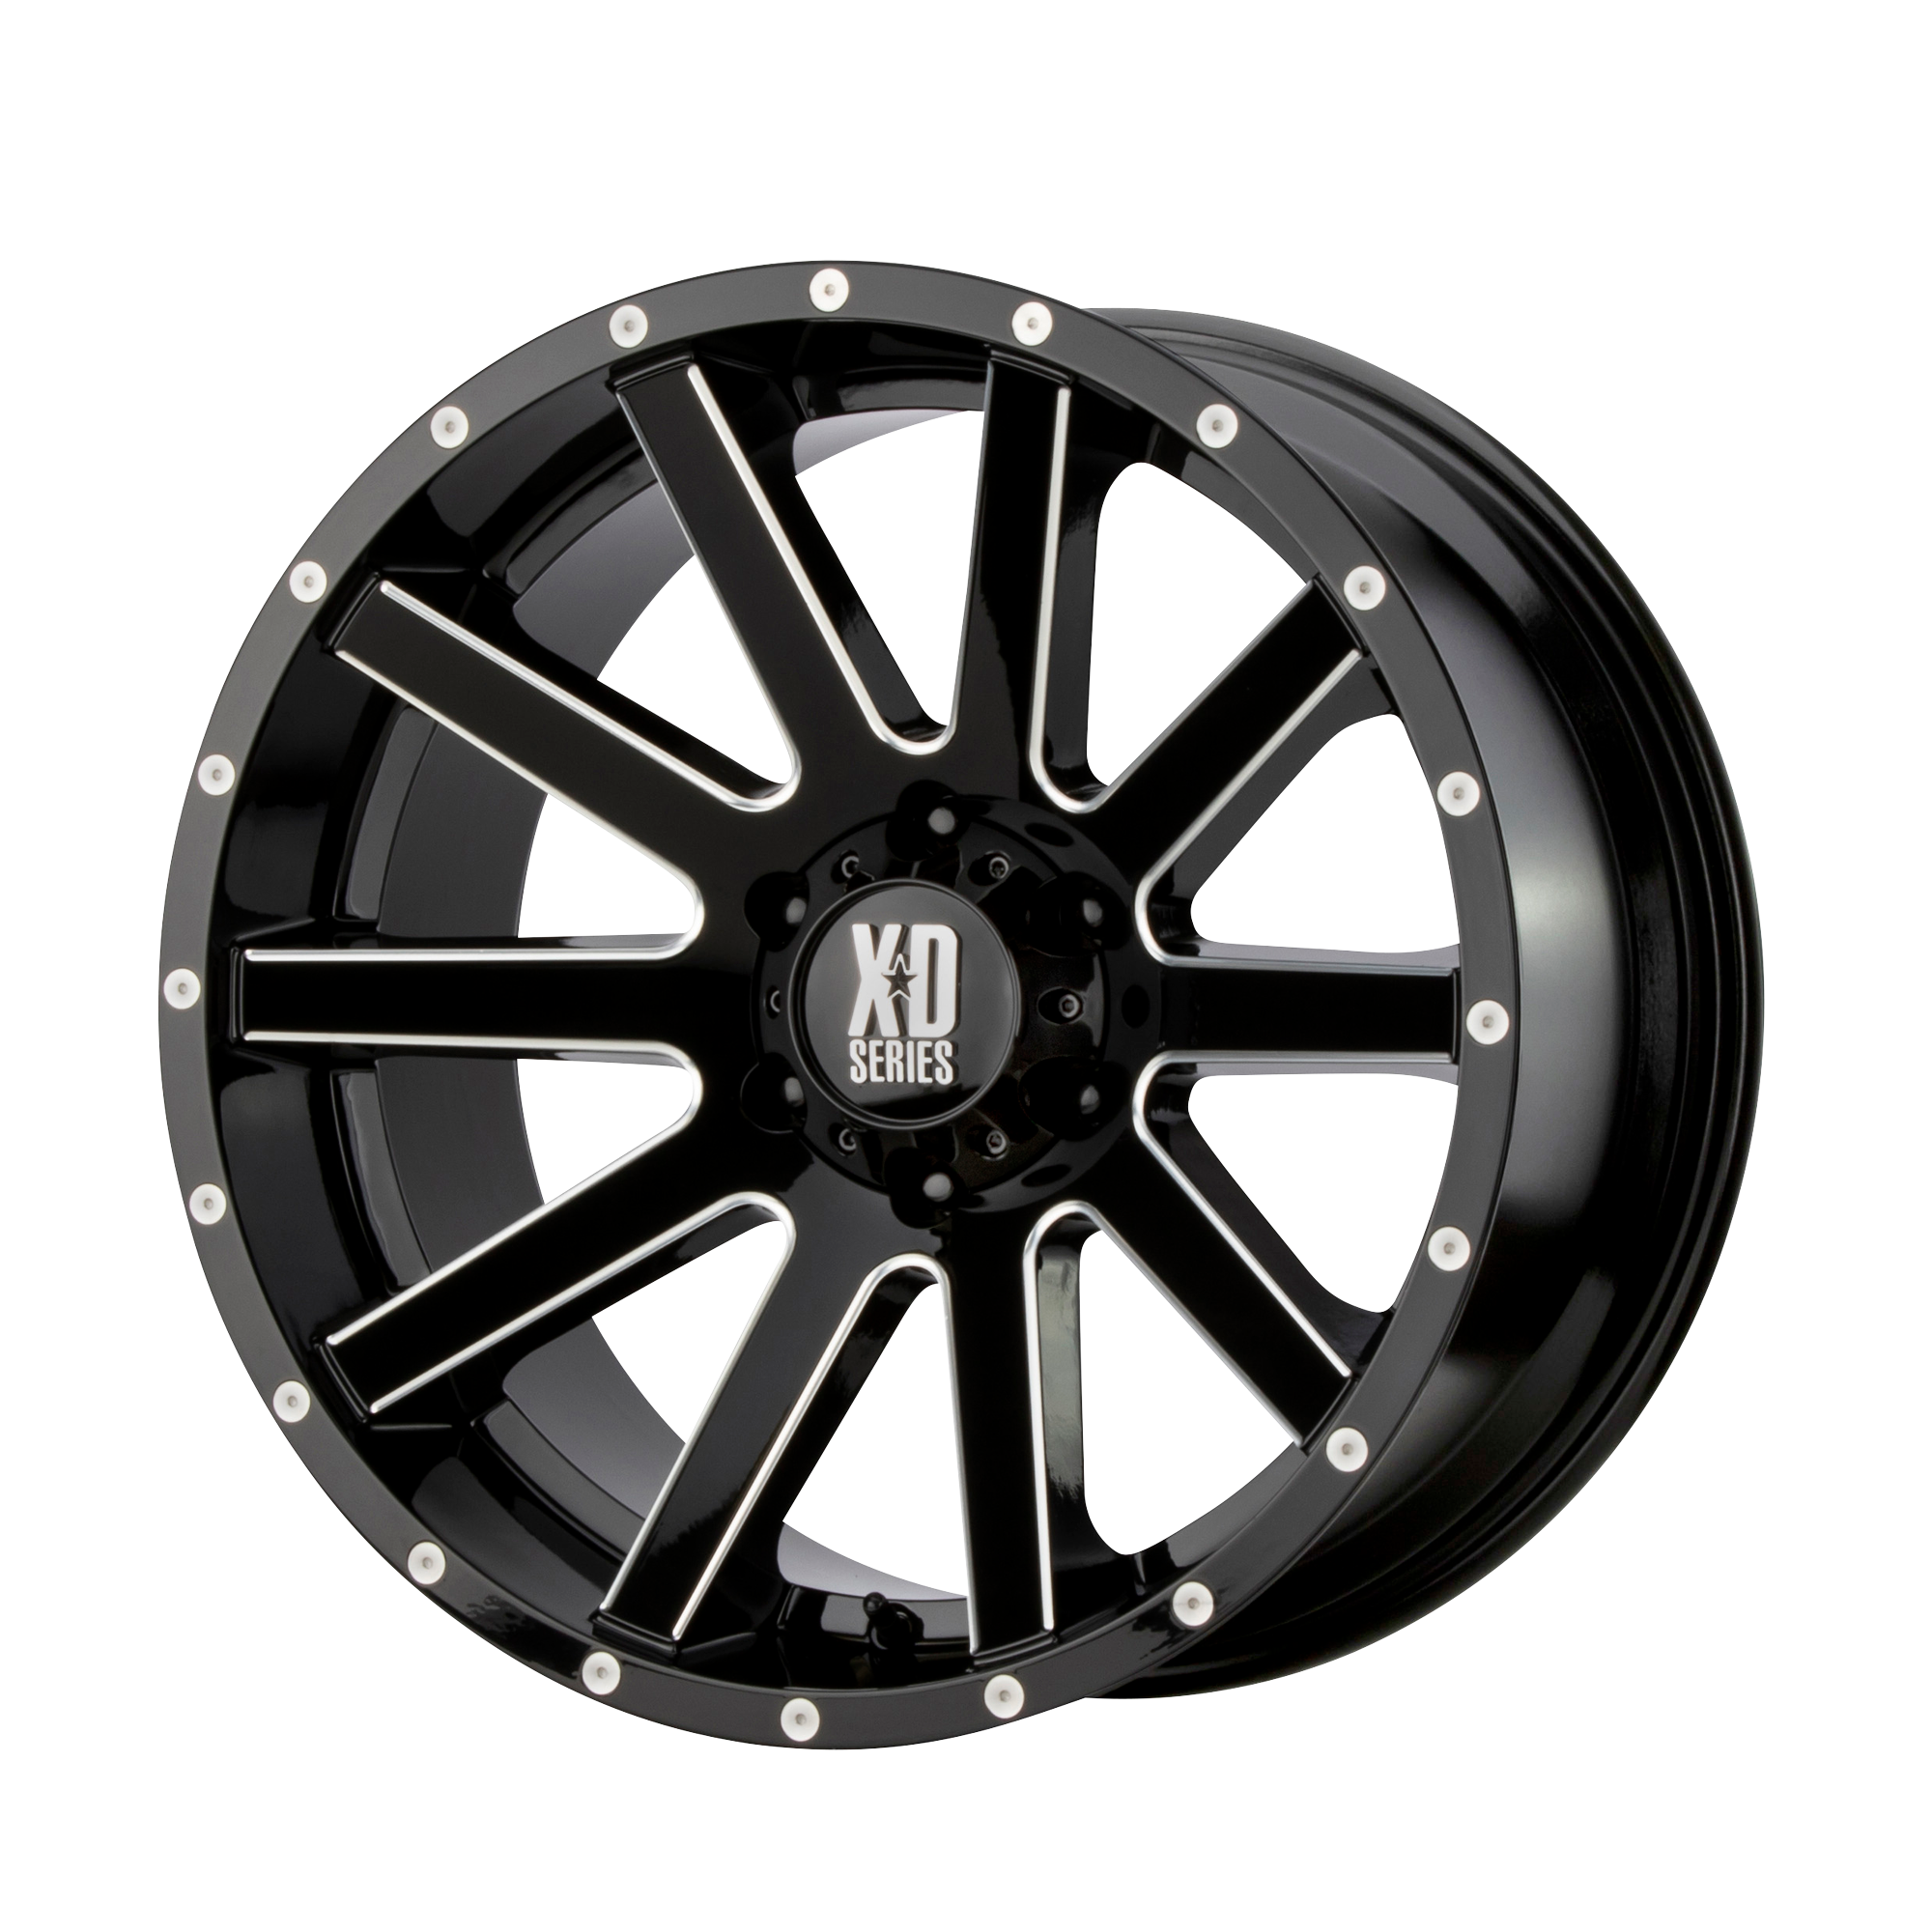 HEIST 20x9 6x139.70 GLOSS BLACK MILLED (30 mm) - Tires and Engine Performance